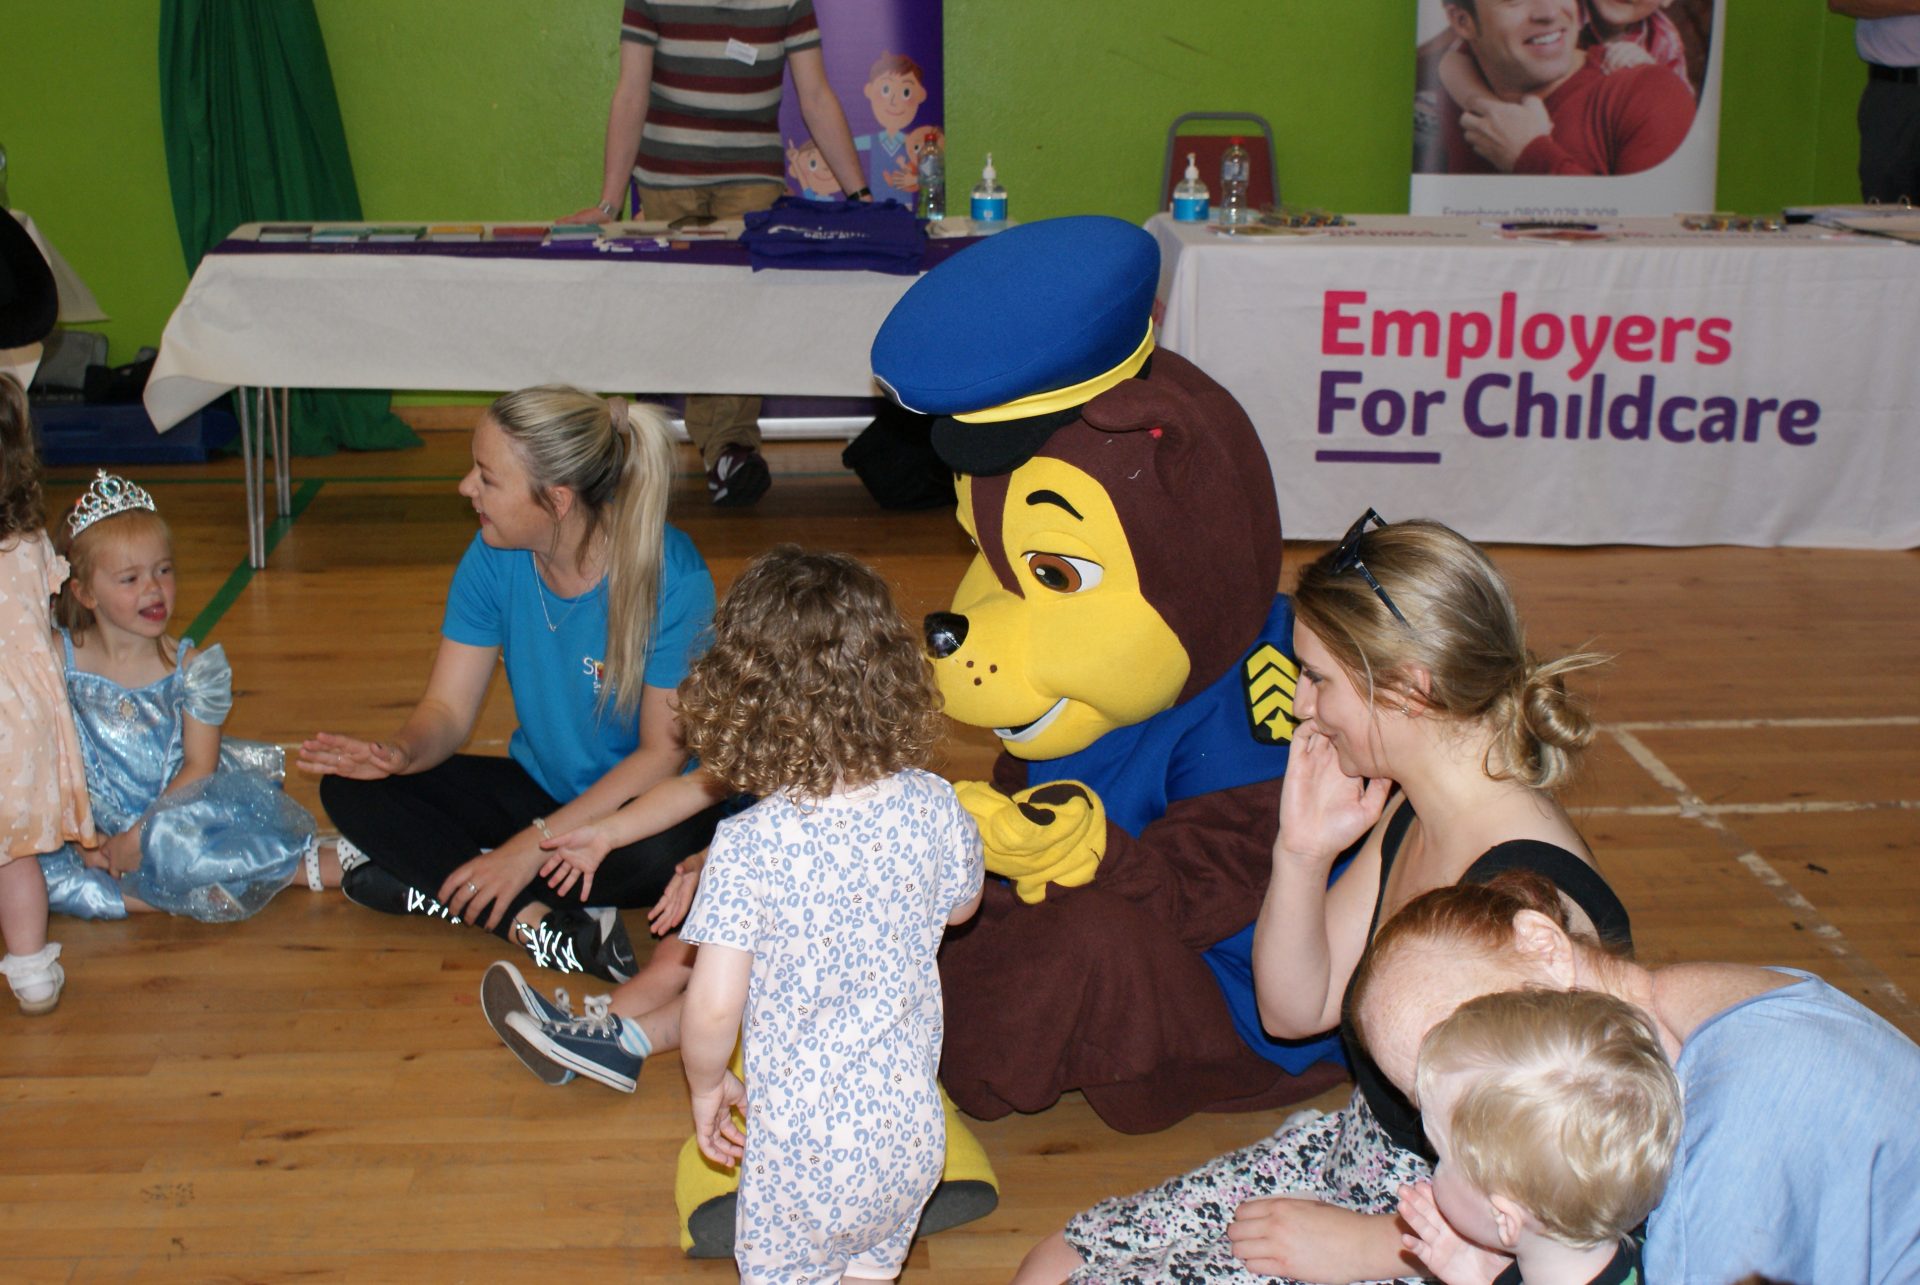 Childcare providers – help parents get financial support towards their childcare costs